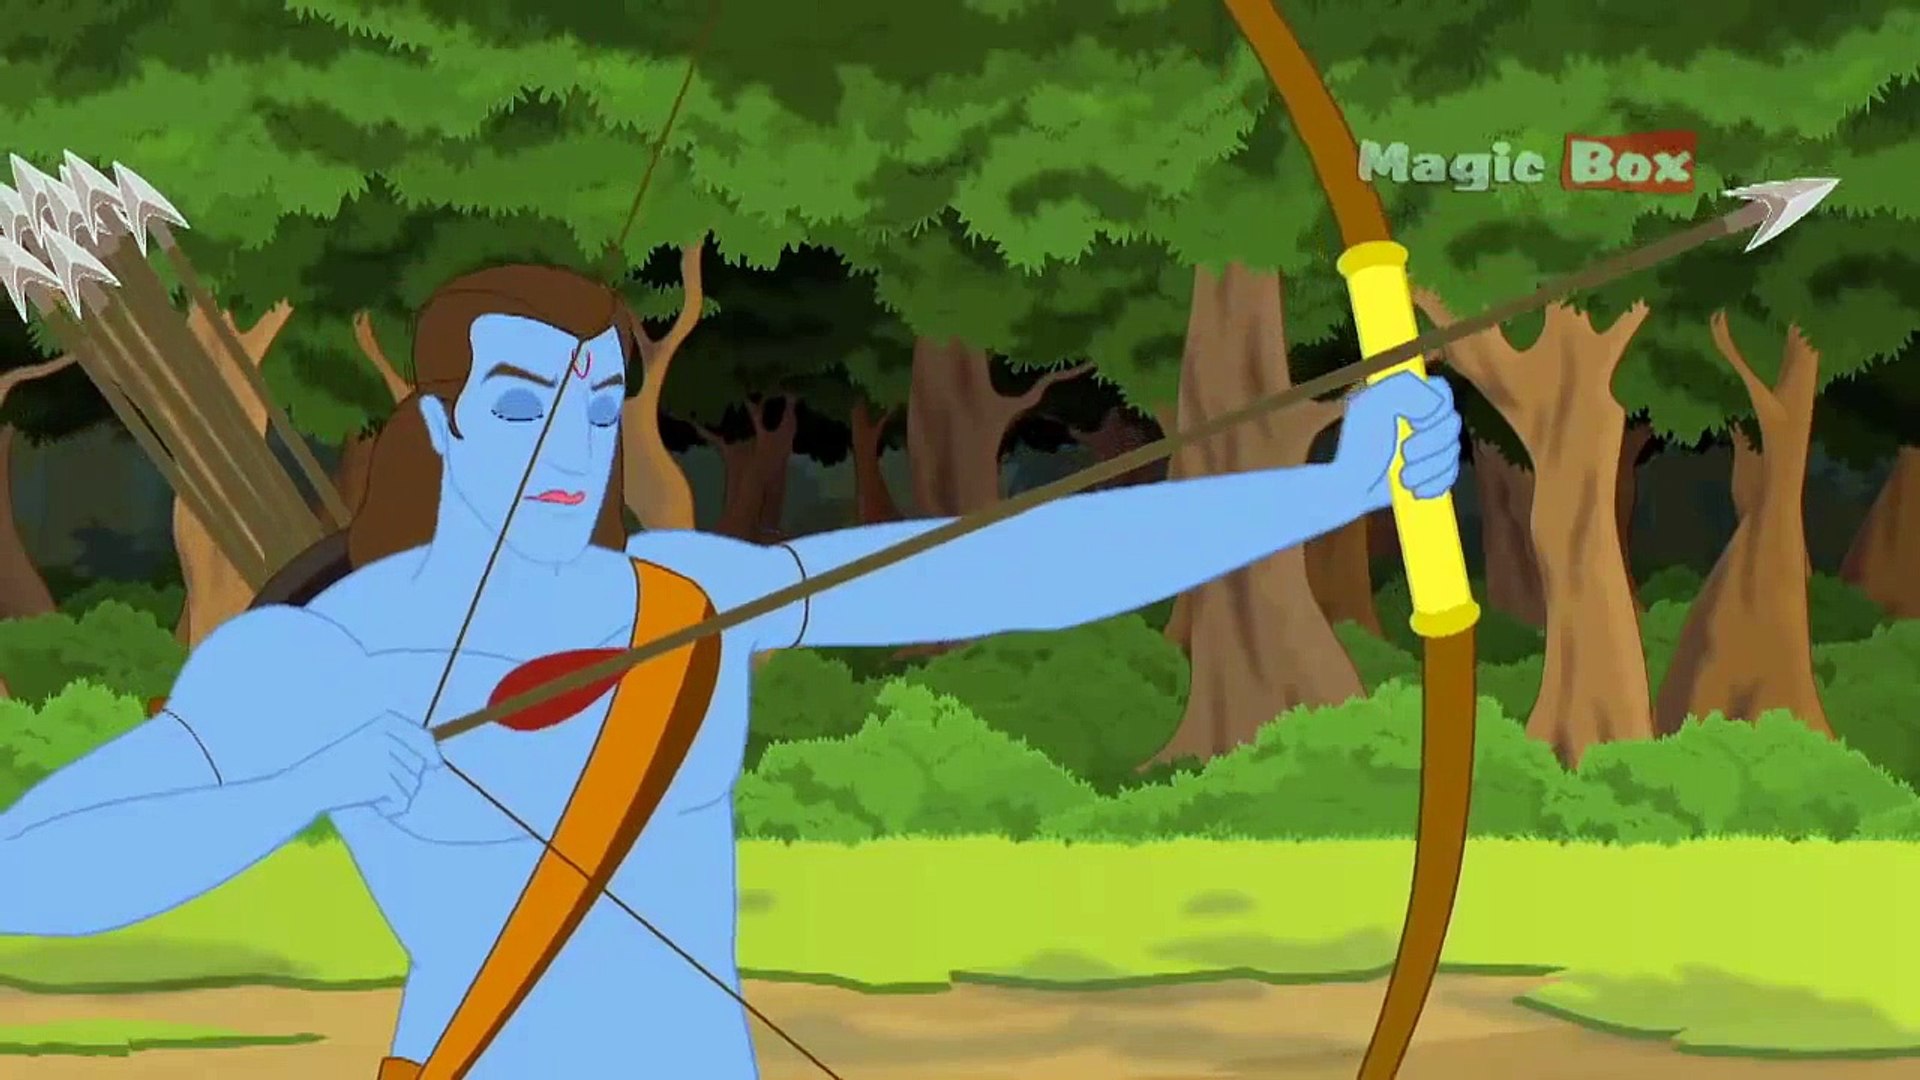 Sita Abducted By Ravana - Ramayanam In Hindi - Animation/Cartoon Stories  For Children - Dailymotion Video